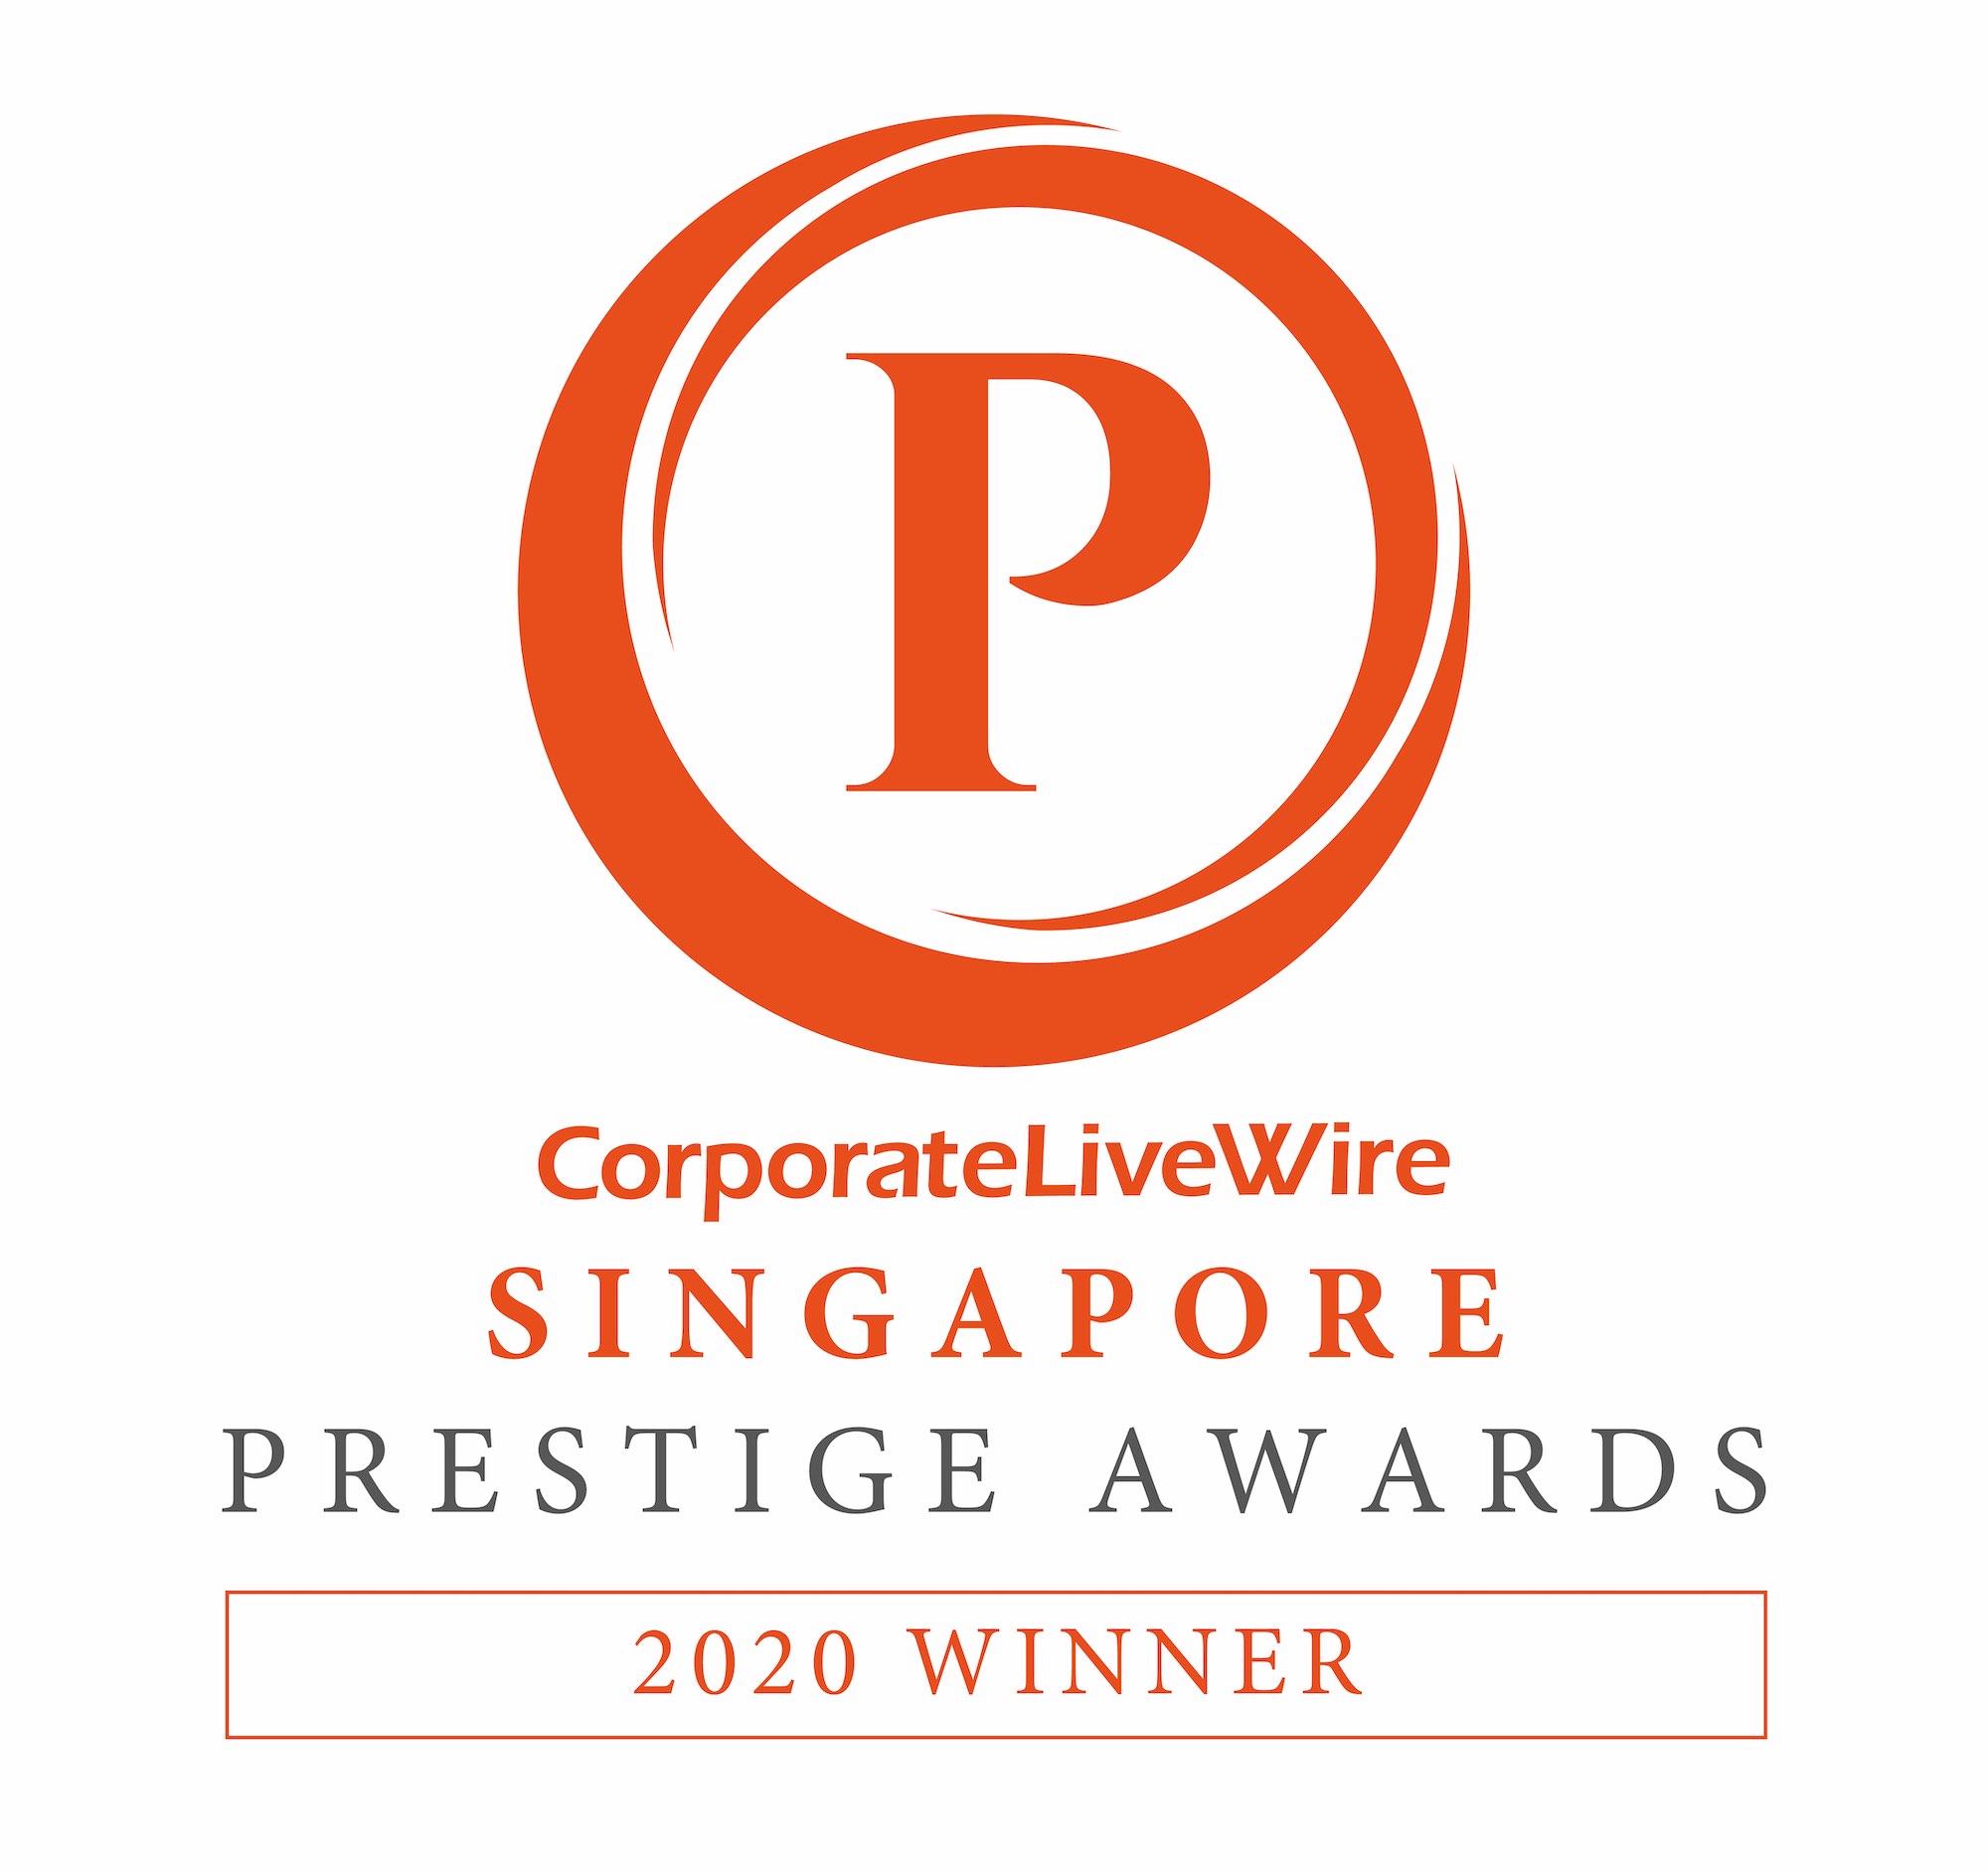 Prestige awards best video company production in Singapore